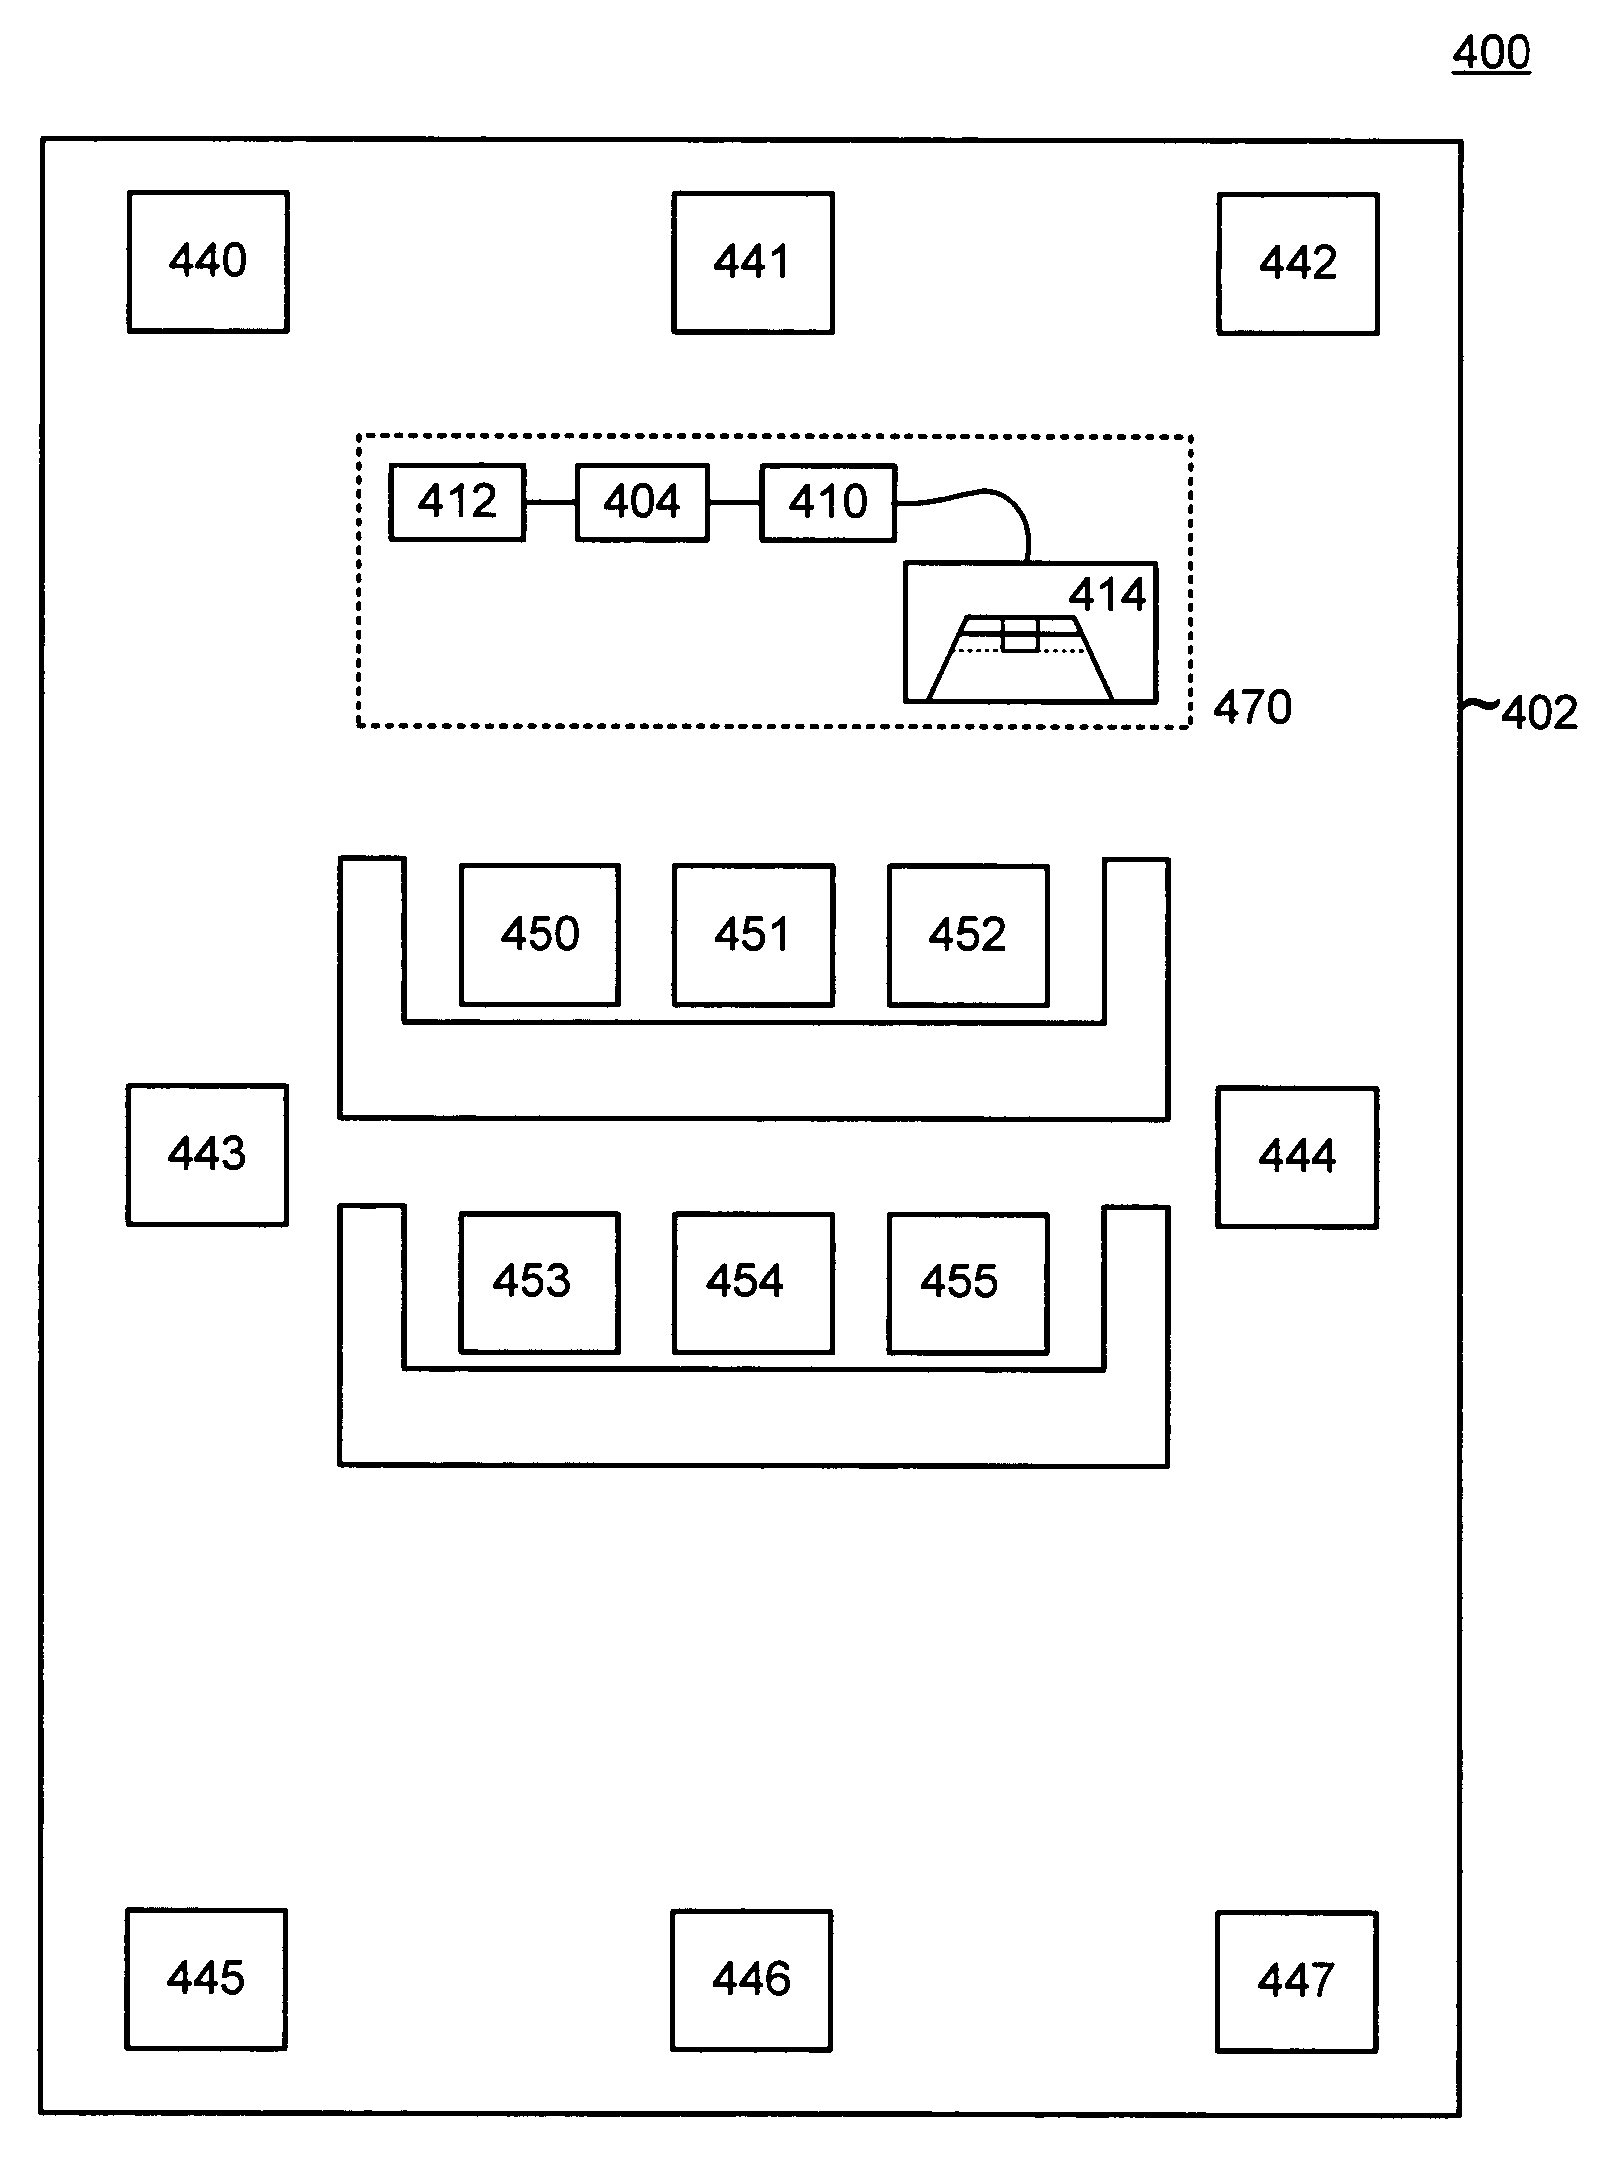 System for configuring audio system